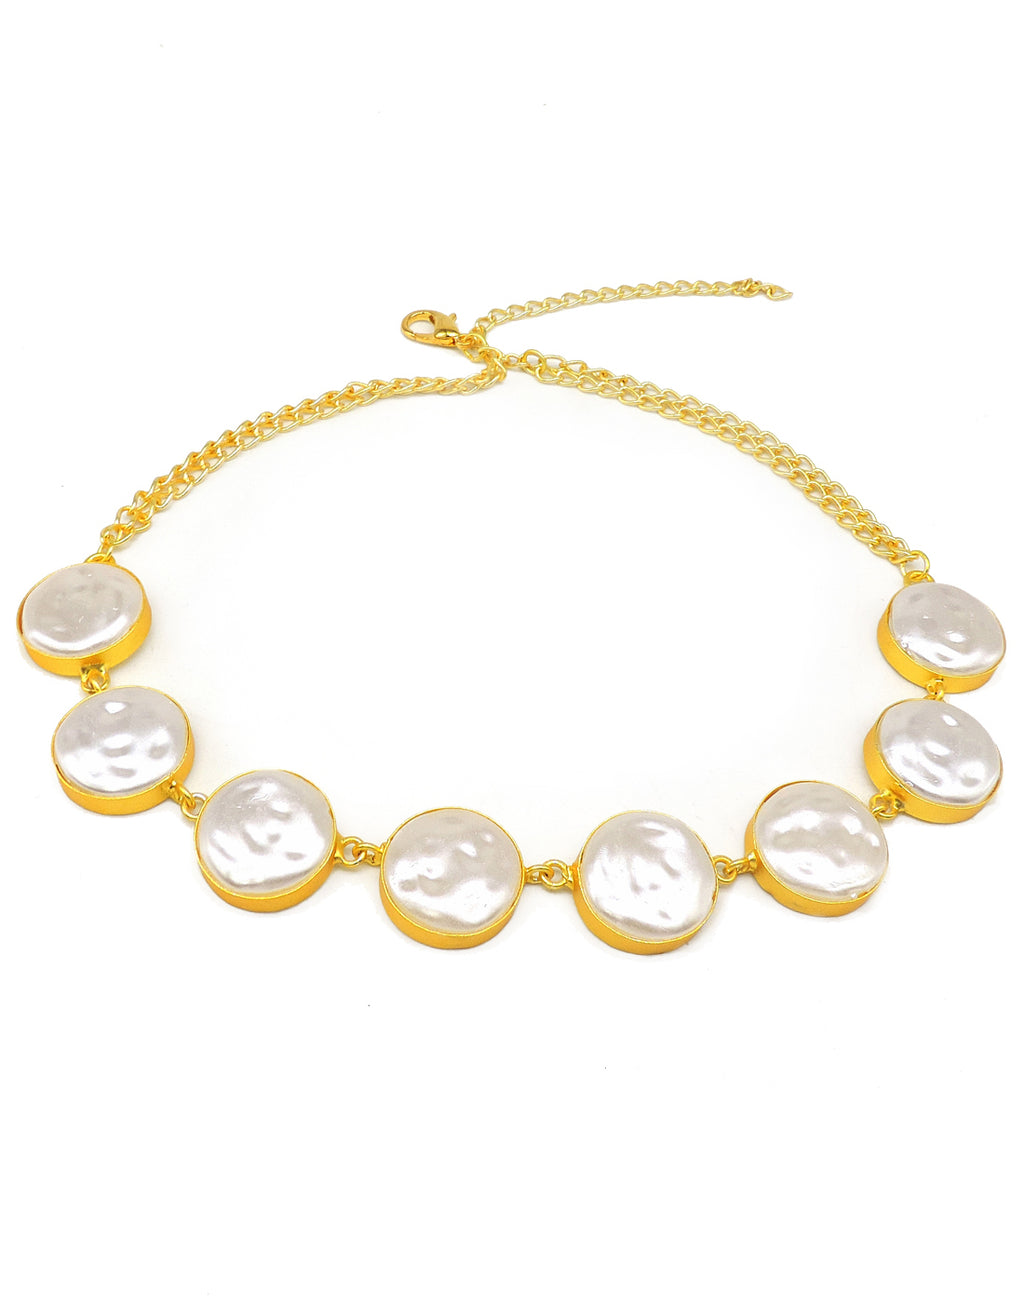 Baroque Pearl Necklace - Statement Necklaces - Gold-Plated & Hypoallergenic Jewellery - Made in India - Dubai Jewellery - Dori